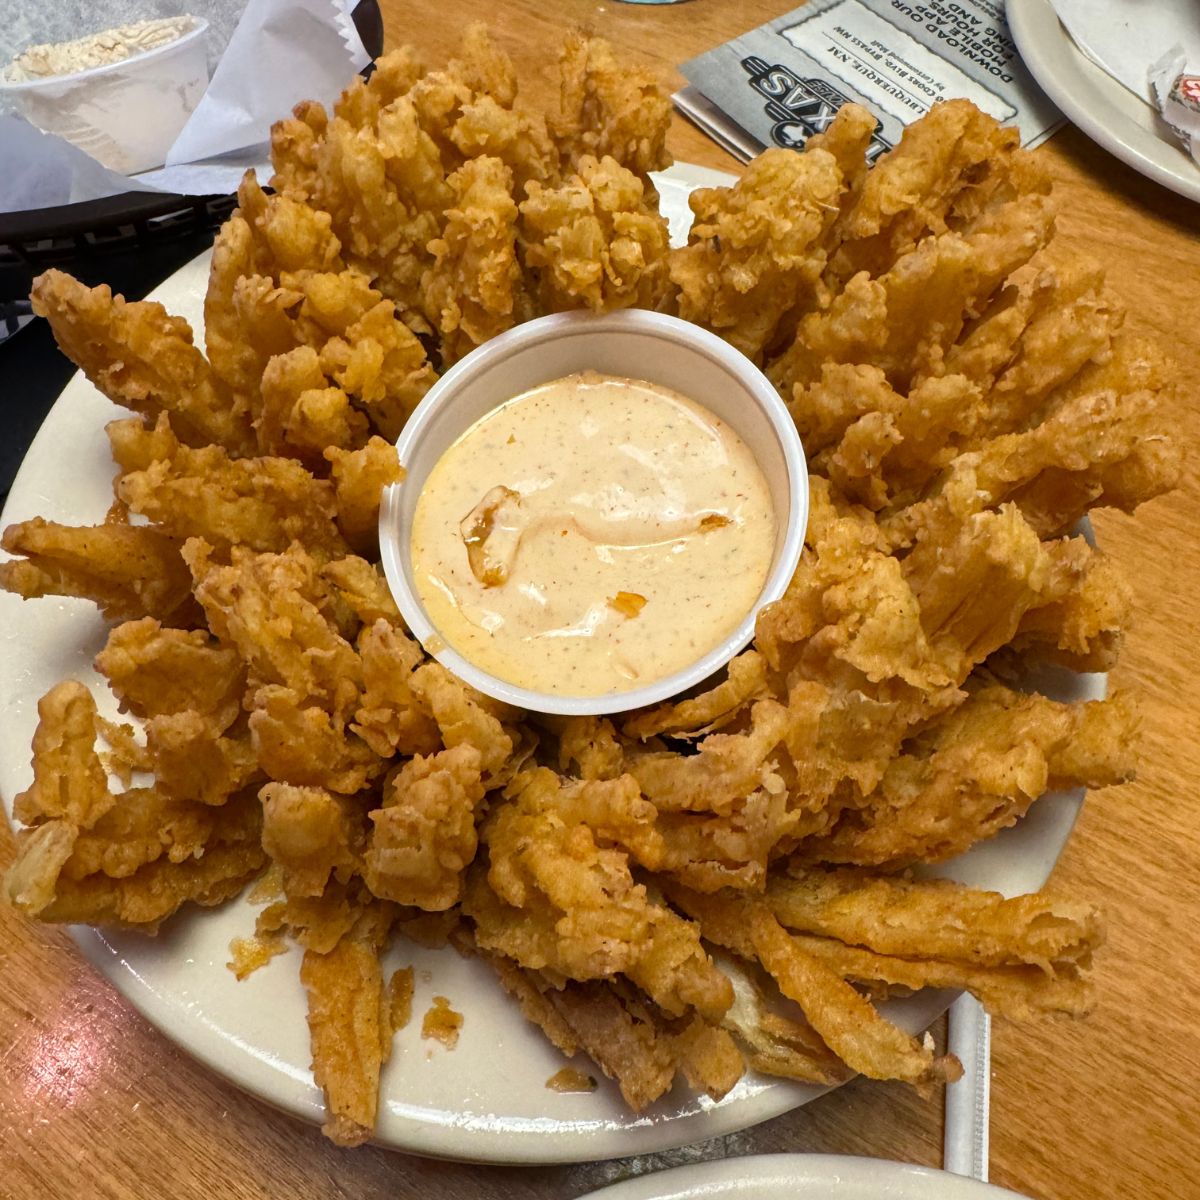 Fried onion with dipping sauce on a plate.